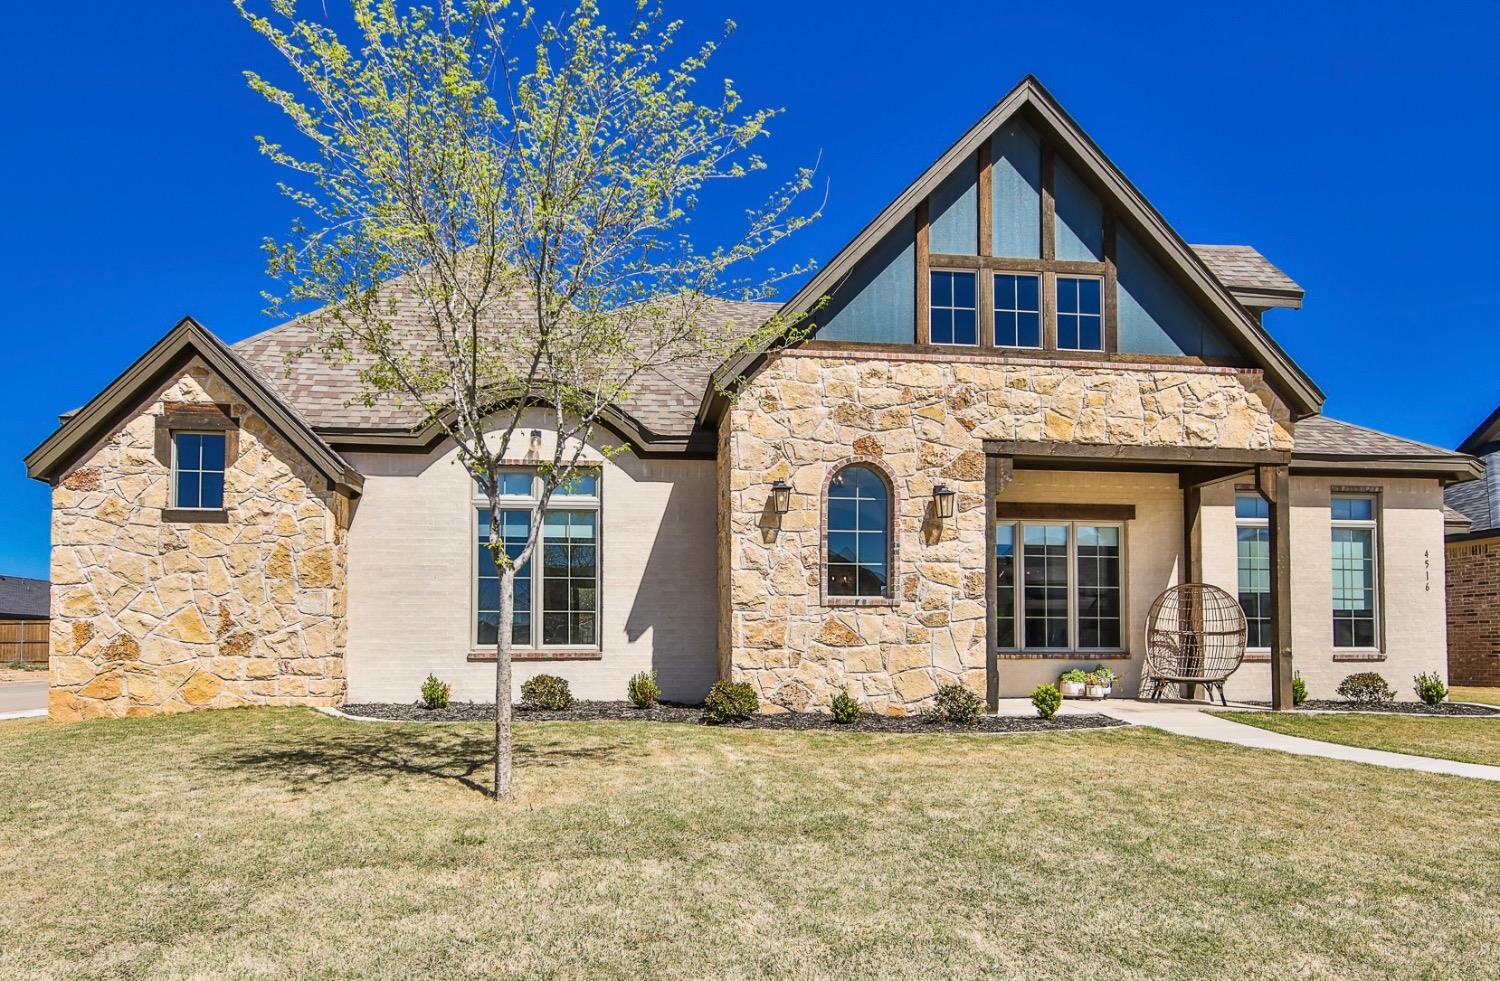 **Open House, Sunday,April 14 from 1-3**  Welcome to your dream home in Stratford Pointe! This stunning 2604 sq ft home offers the perfect blend of comfort and elegance, featuring a spacious open floor plan that's perfect for modern living.  It offers 4 bedrooms including an isolated master, 3 bathrooms, a bonus room, and a 3 car, attached garage.  The chef inspired kitchen has a large island, double ovens, large pantry and plenty of prep room.  This beautiful home has great curb appeal, is located on a double cul-de-sac and is one block away from a the neighborhood pond and walking park.  Lots of beautiful details in this lovely home.  Come see it today!